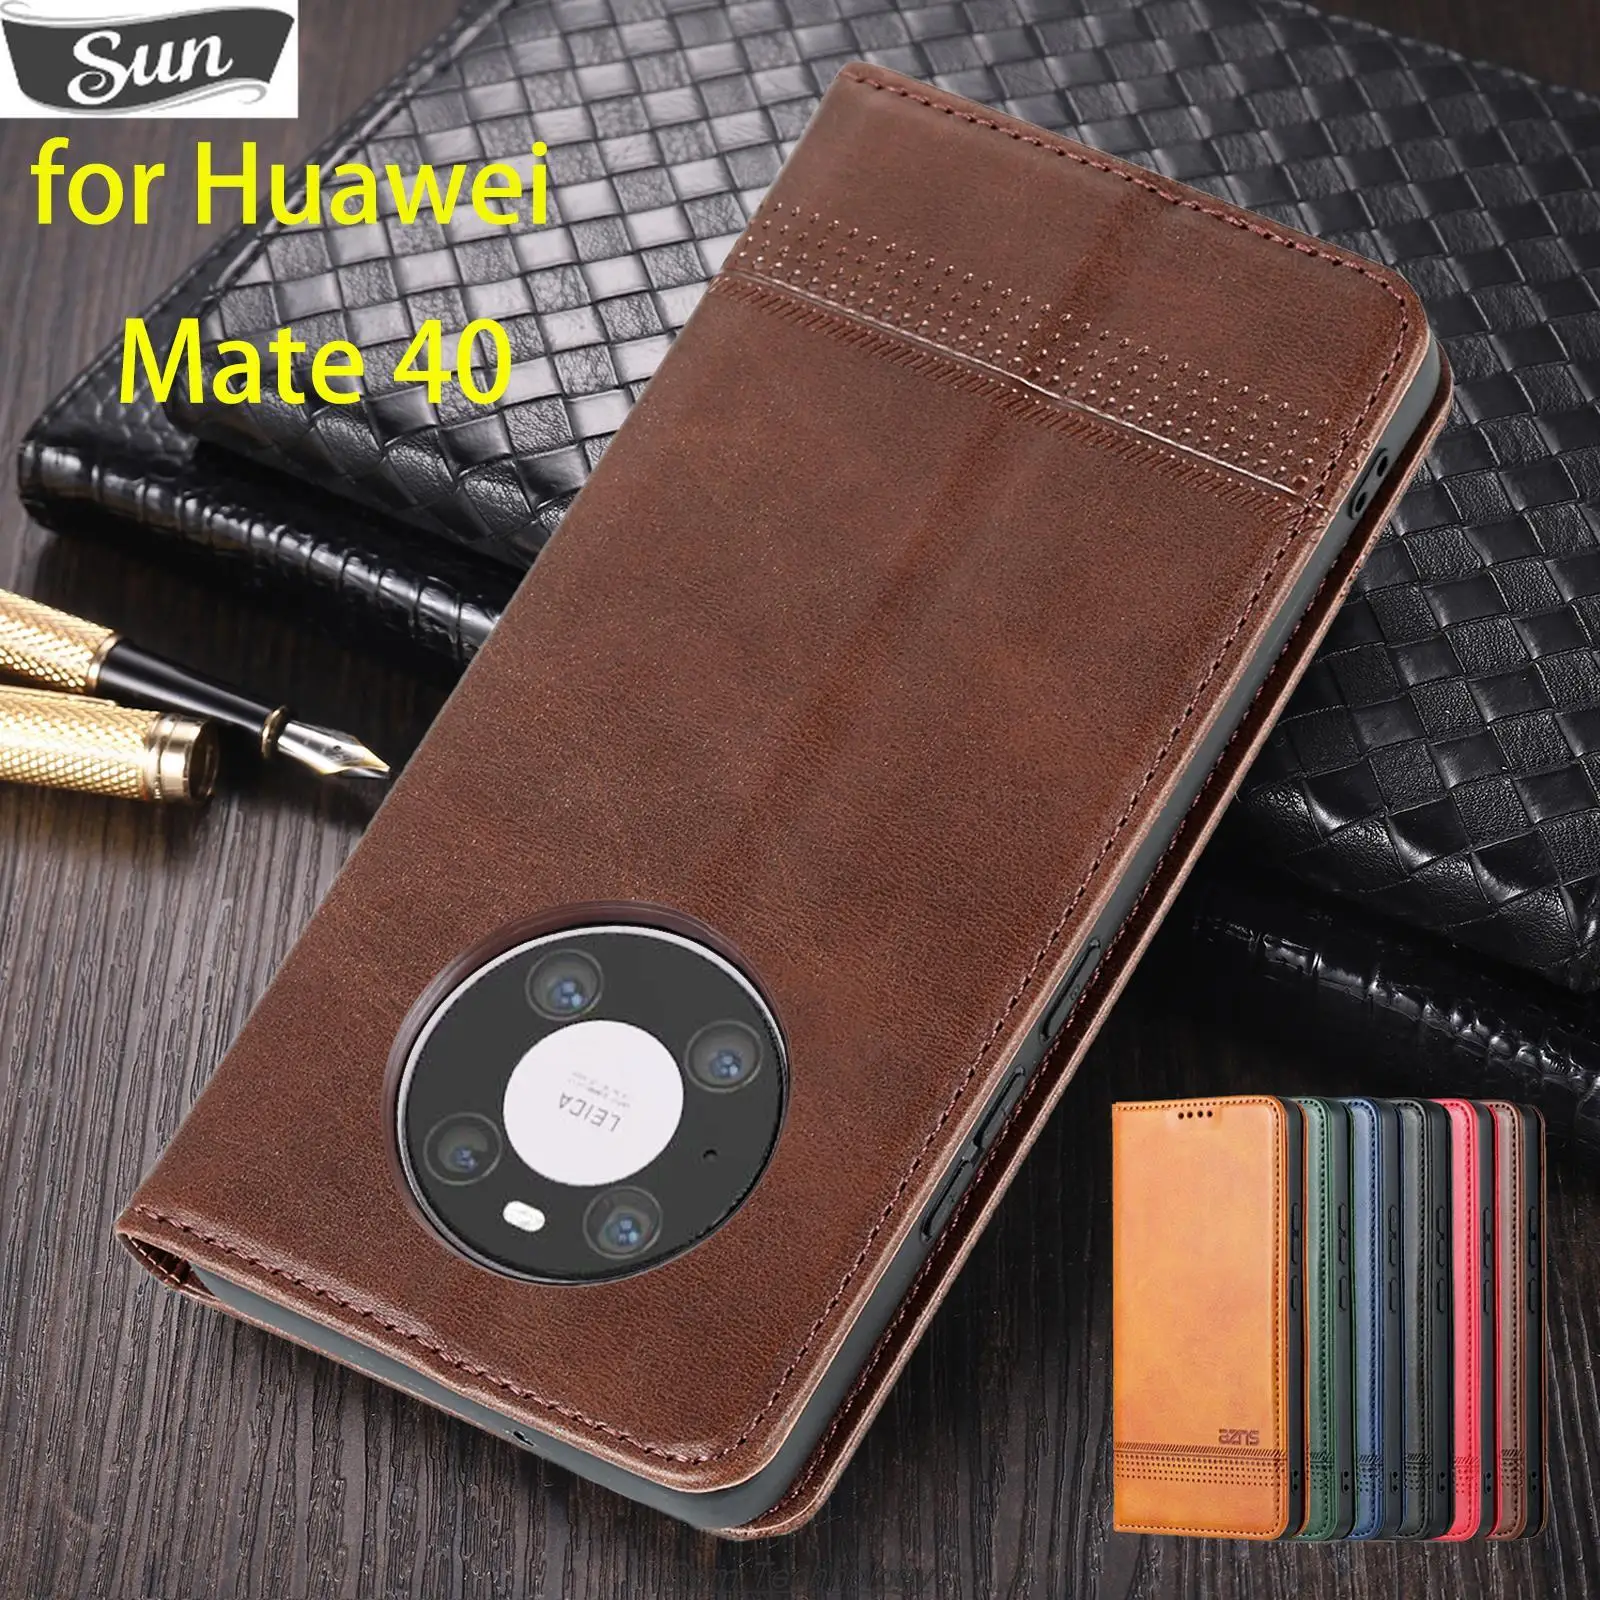 

Deluxe Magnetic Adsorption Leather Fitted Case for Huawei Mate 40 / Mate40 Flip Cover Protective Case Capa Fundas Coque